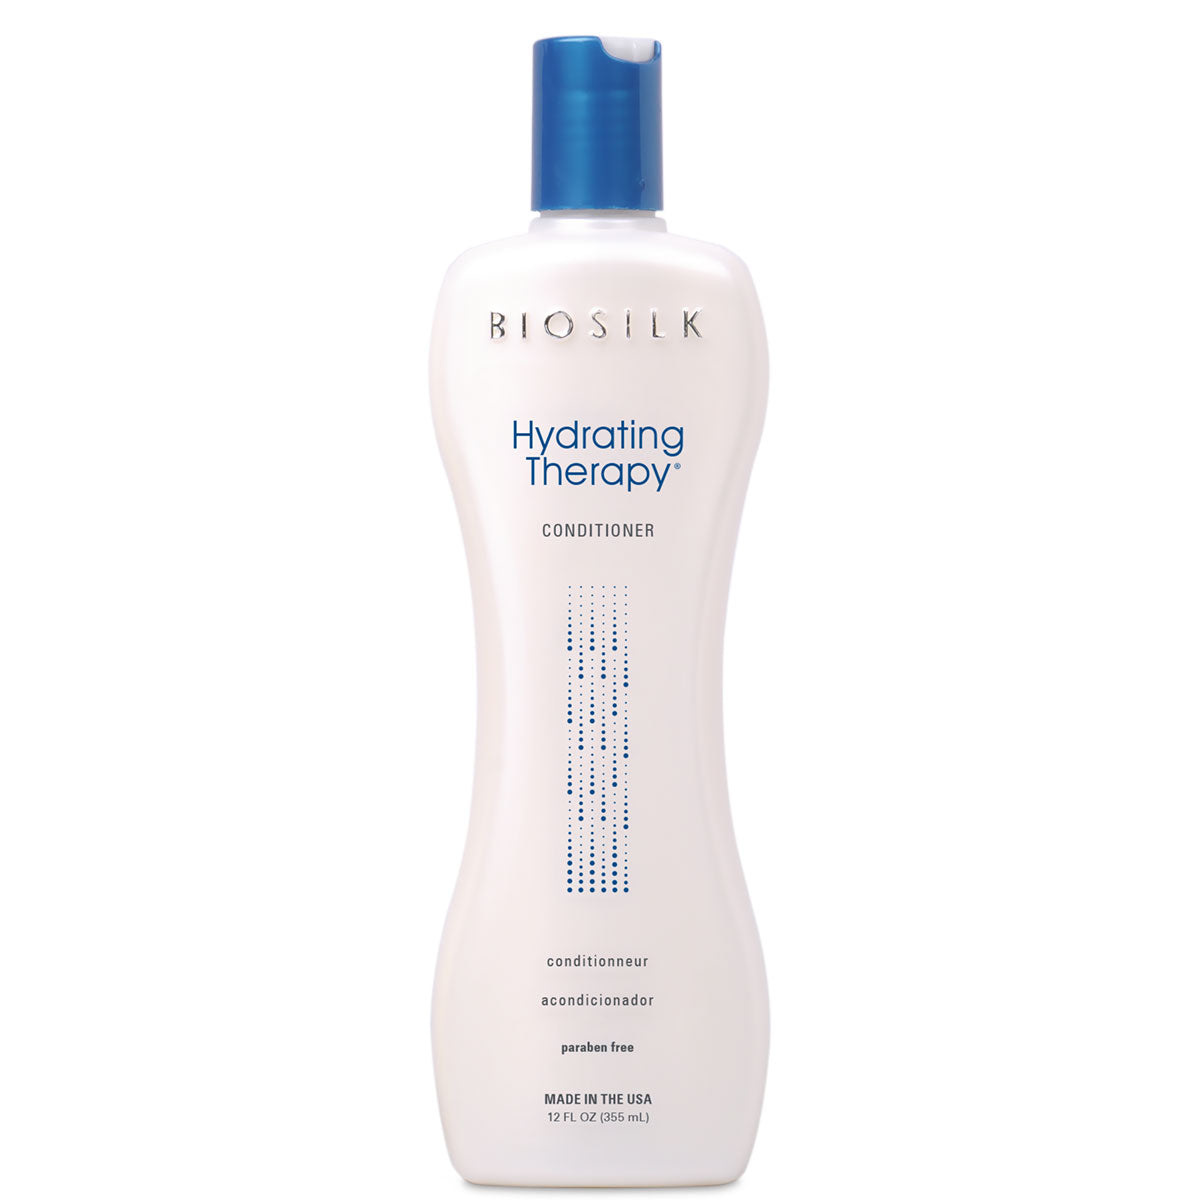 HYDRATING THERAPY Conditionneur